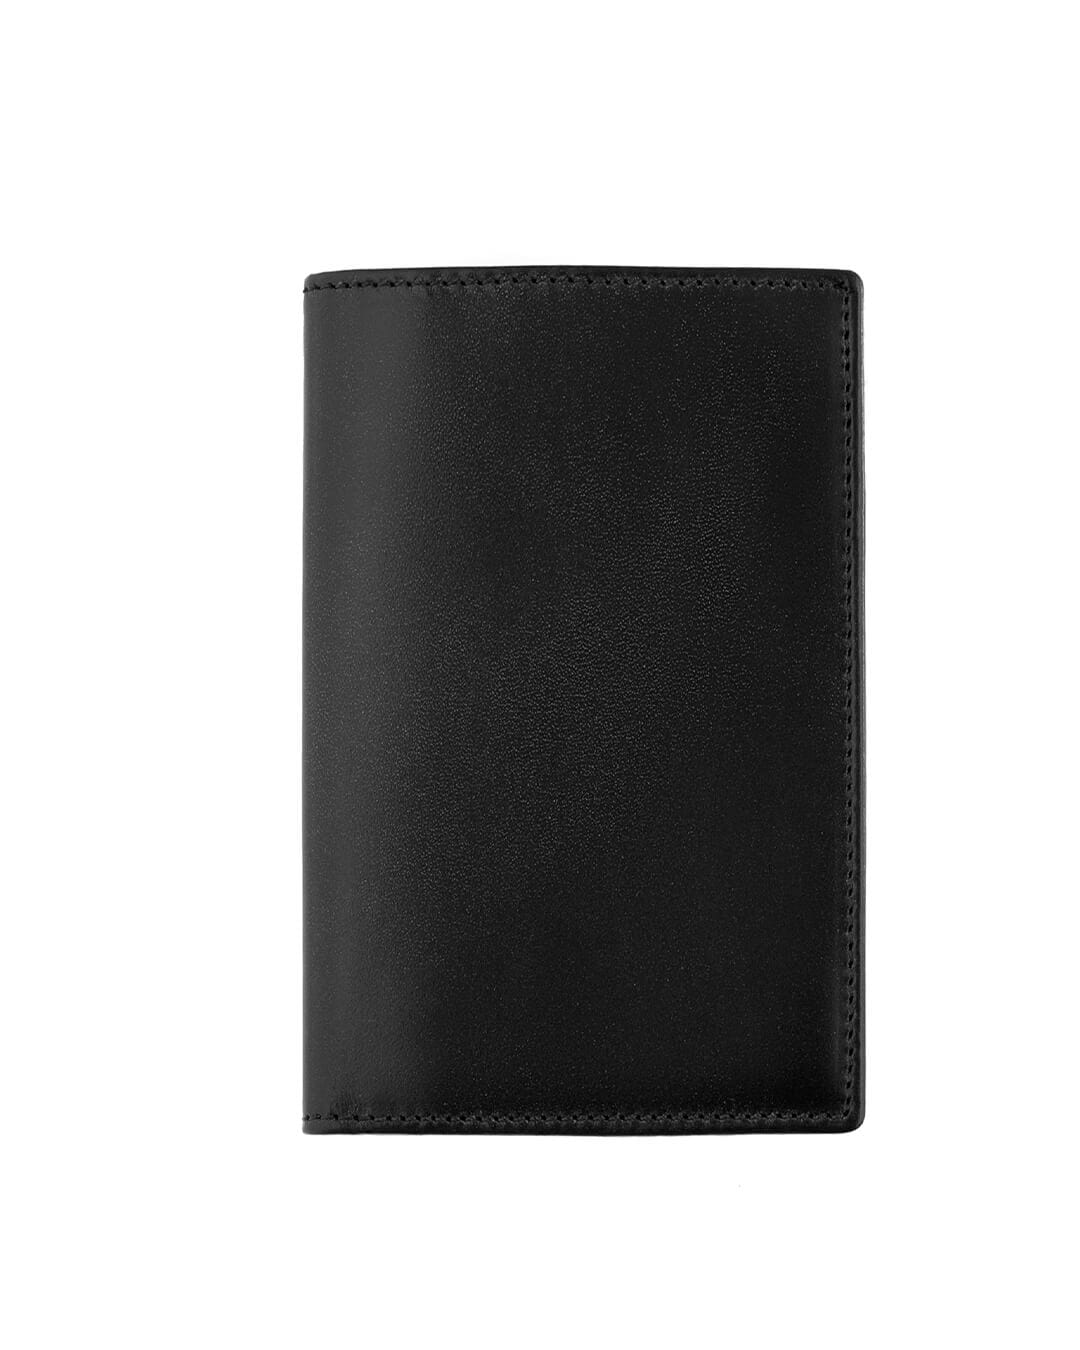 Cavesson's Wallets Cavesson's Black And Aqua Card Wallet